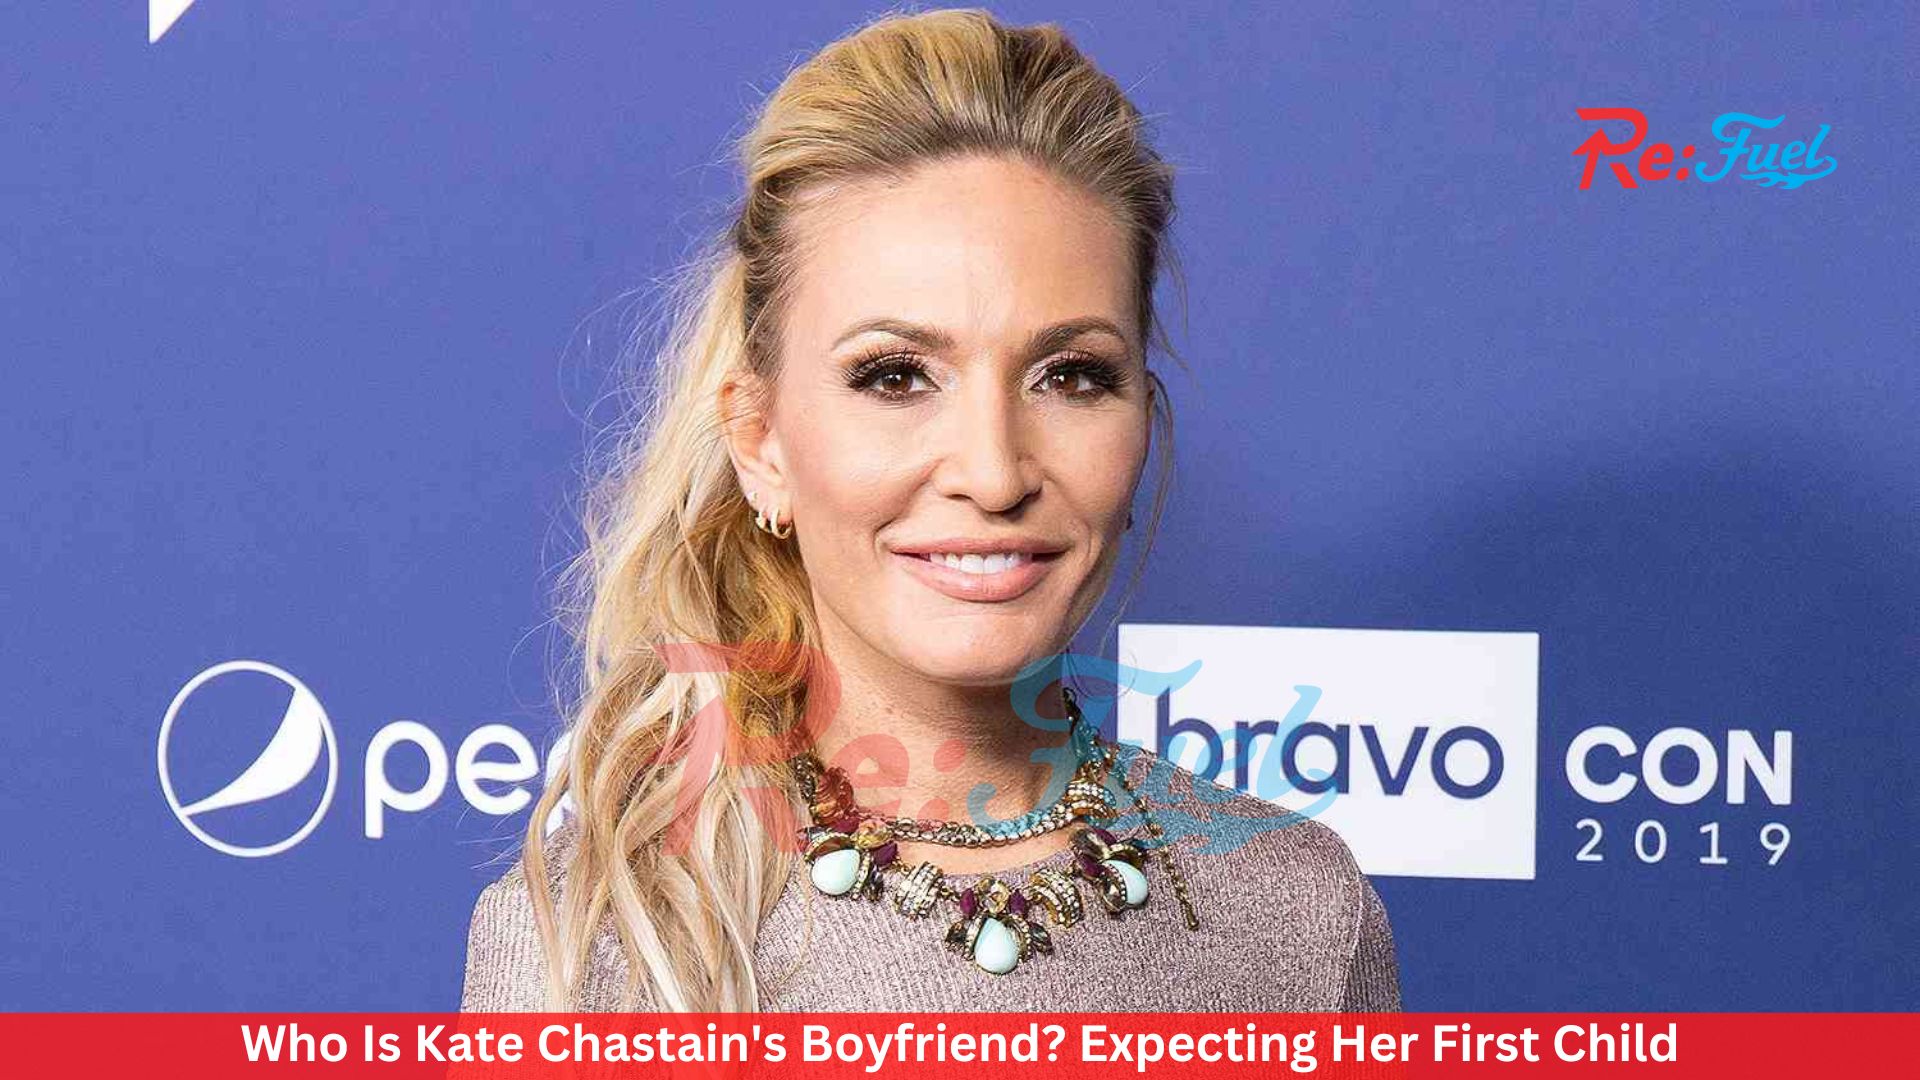 Who Is Kate Chastain's Boyfriend? Expecting Her First Child